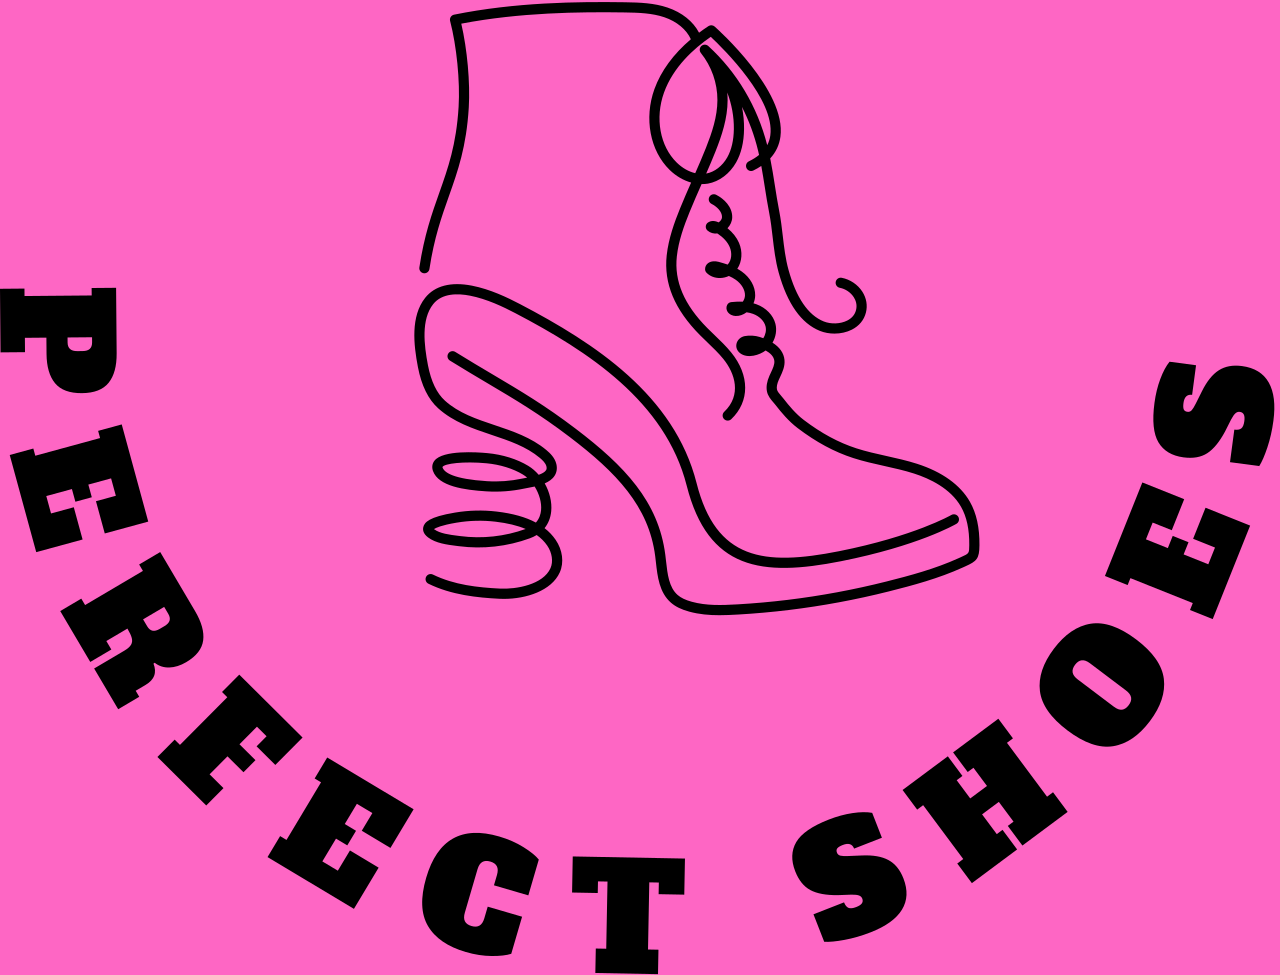 PERFECT SHOES 's logo